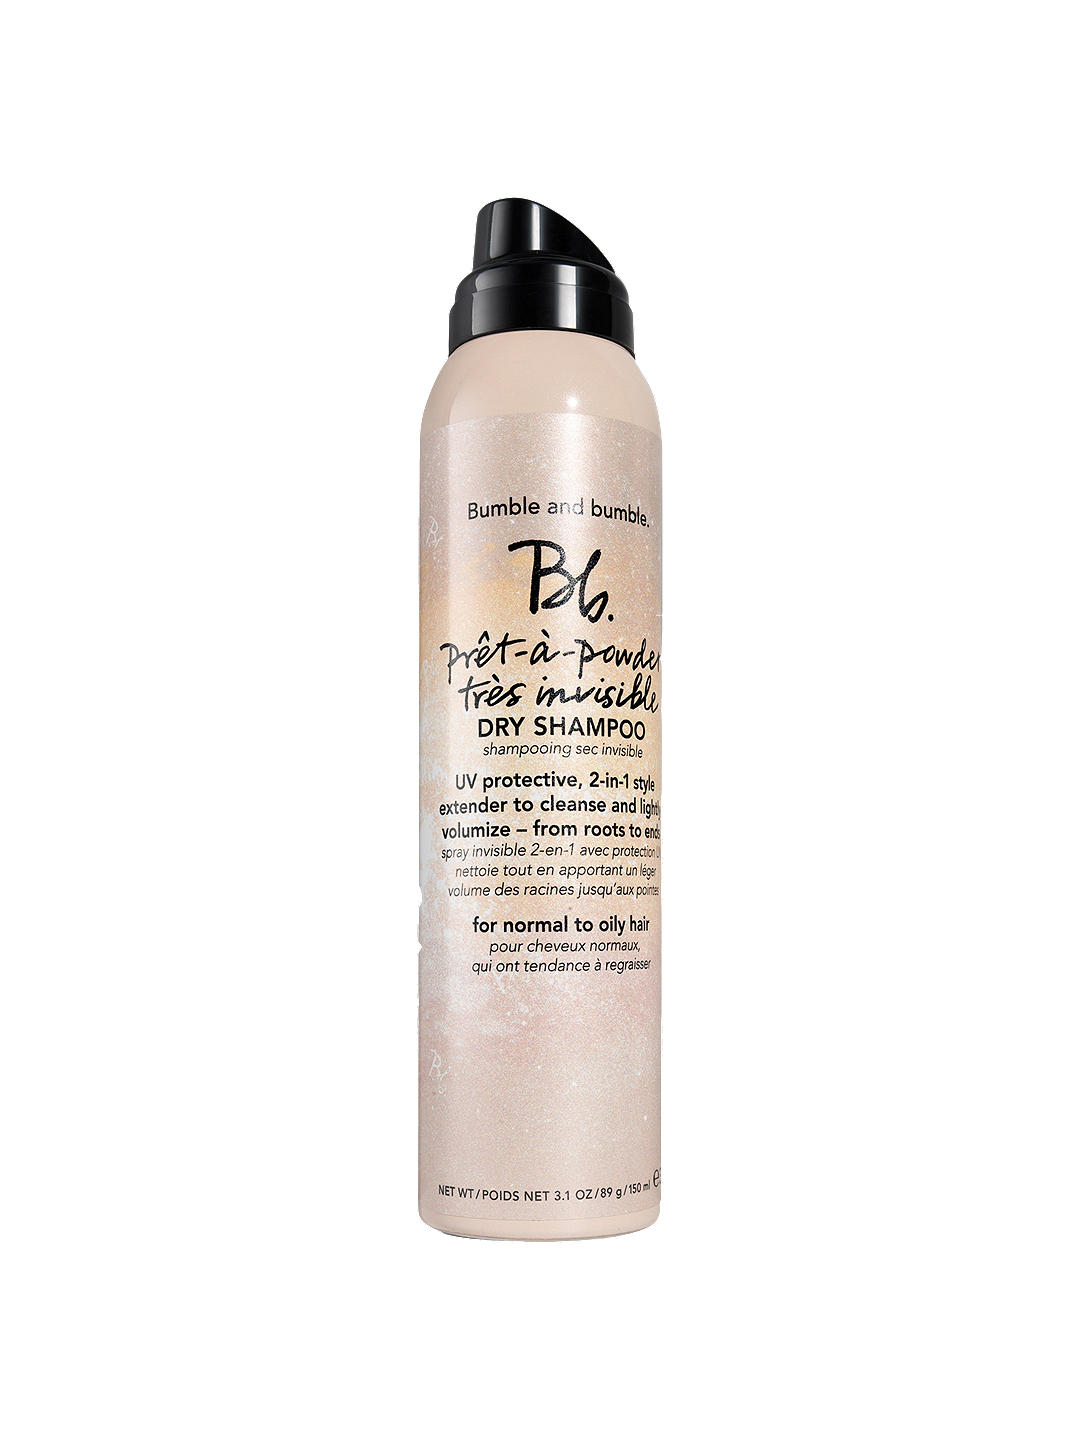 Bumble and bumble Pret A Powder Tres Invisible Dry Shampoo, 150ml 1